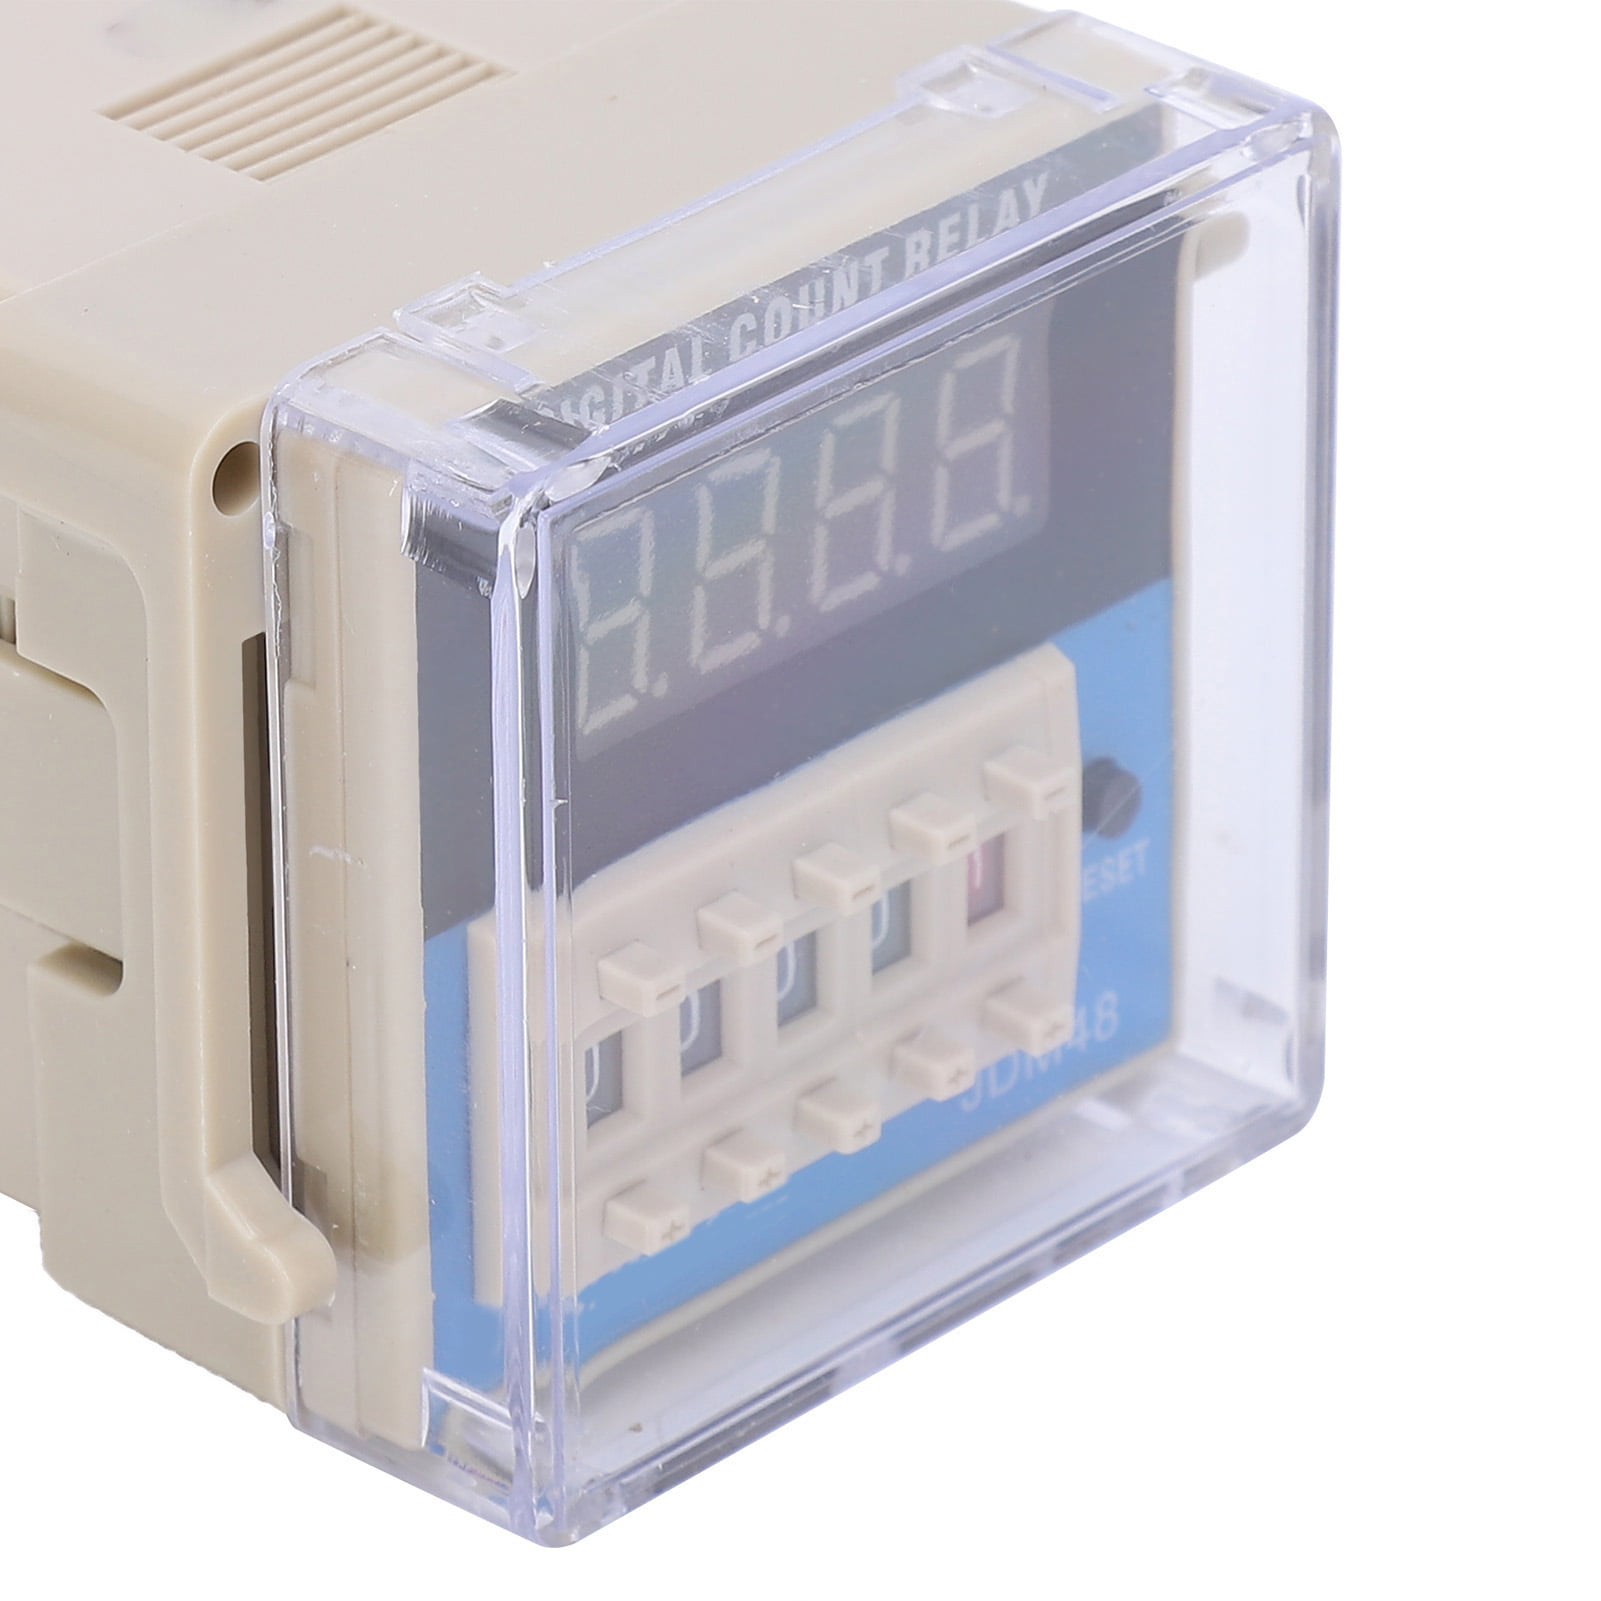 Details about   Time Delay Relay Plastic Adjustable Cycle Delay Relay Control Component JDM48‑11 